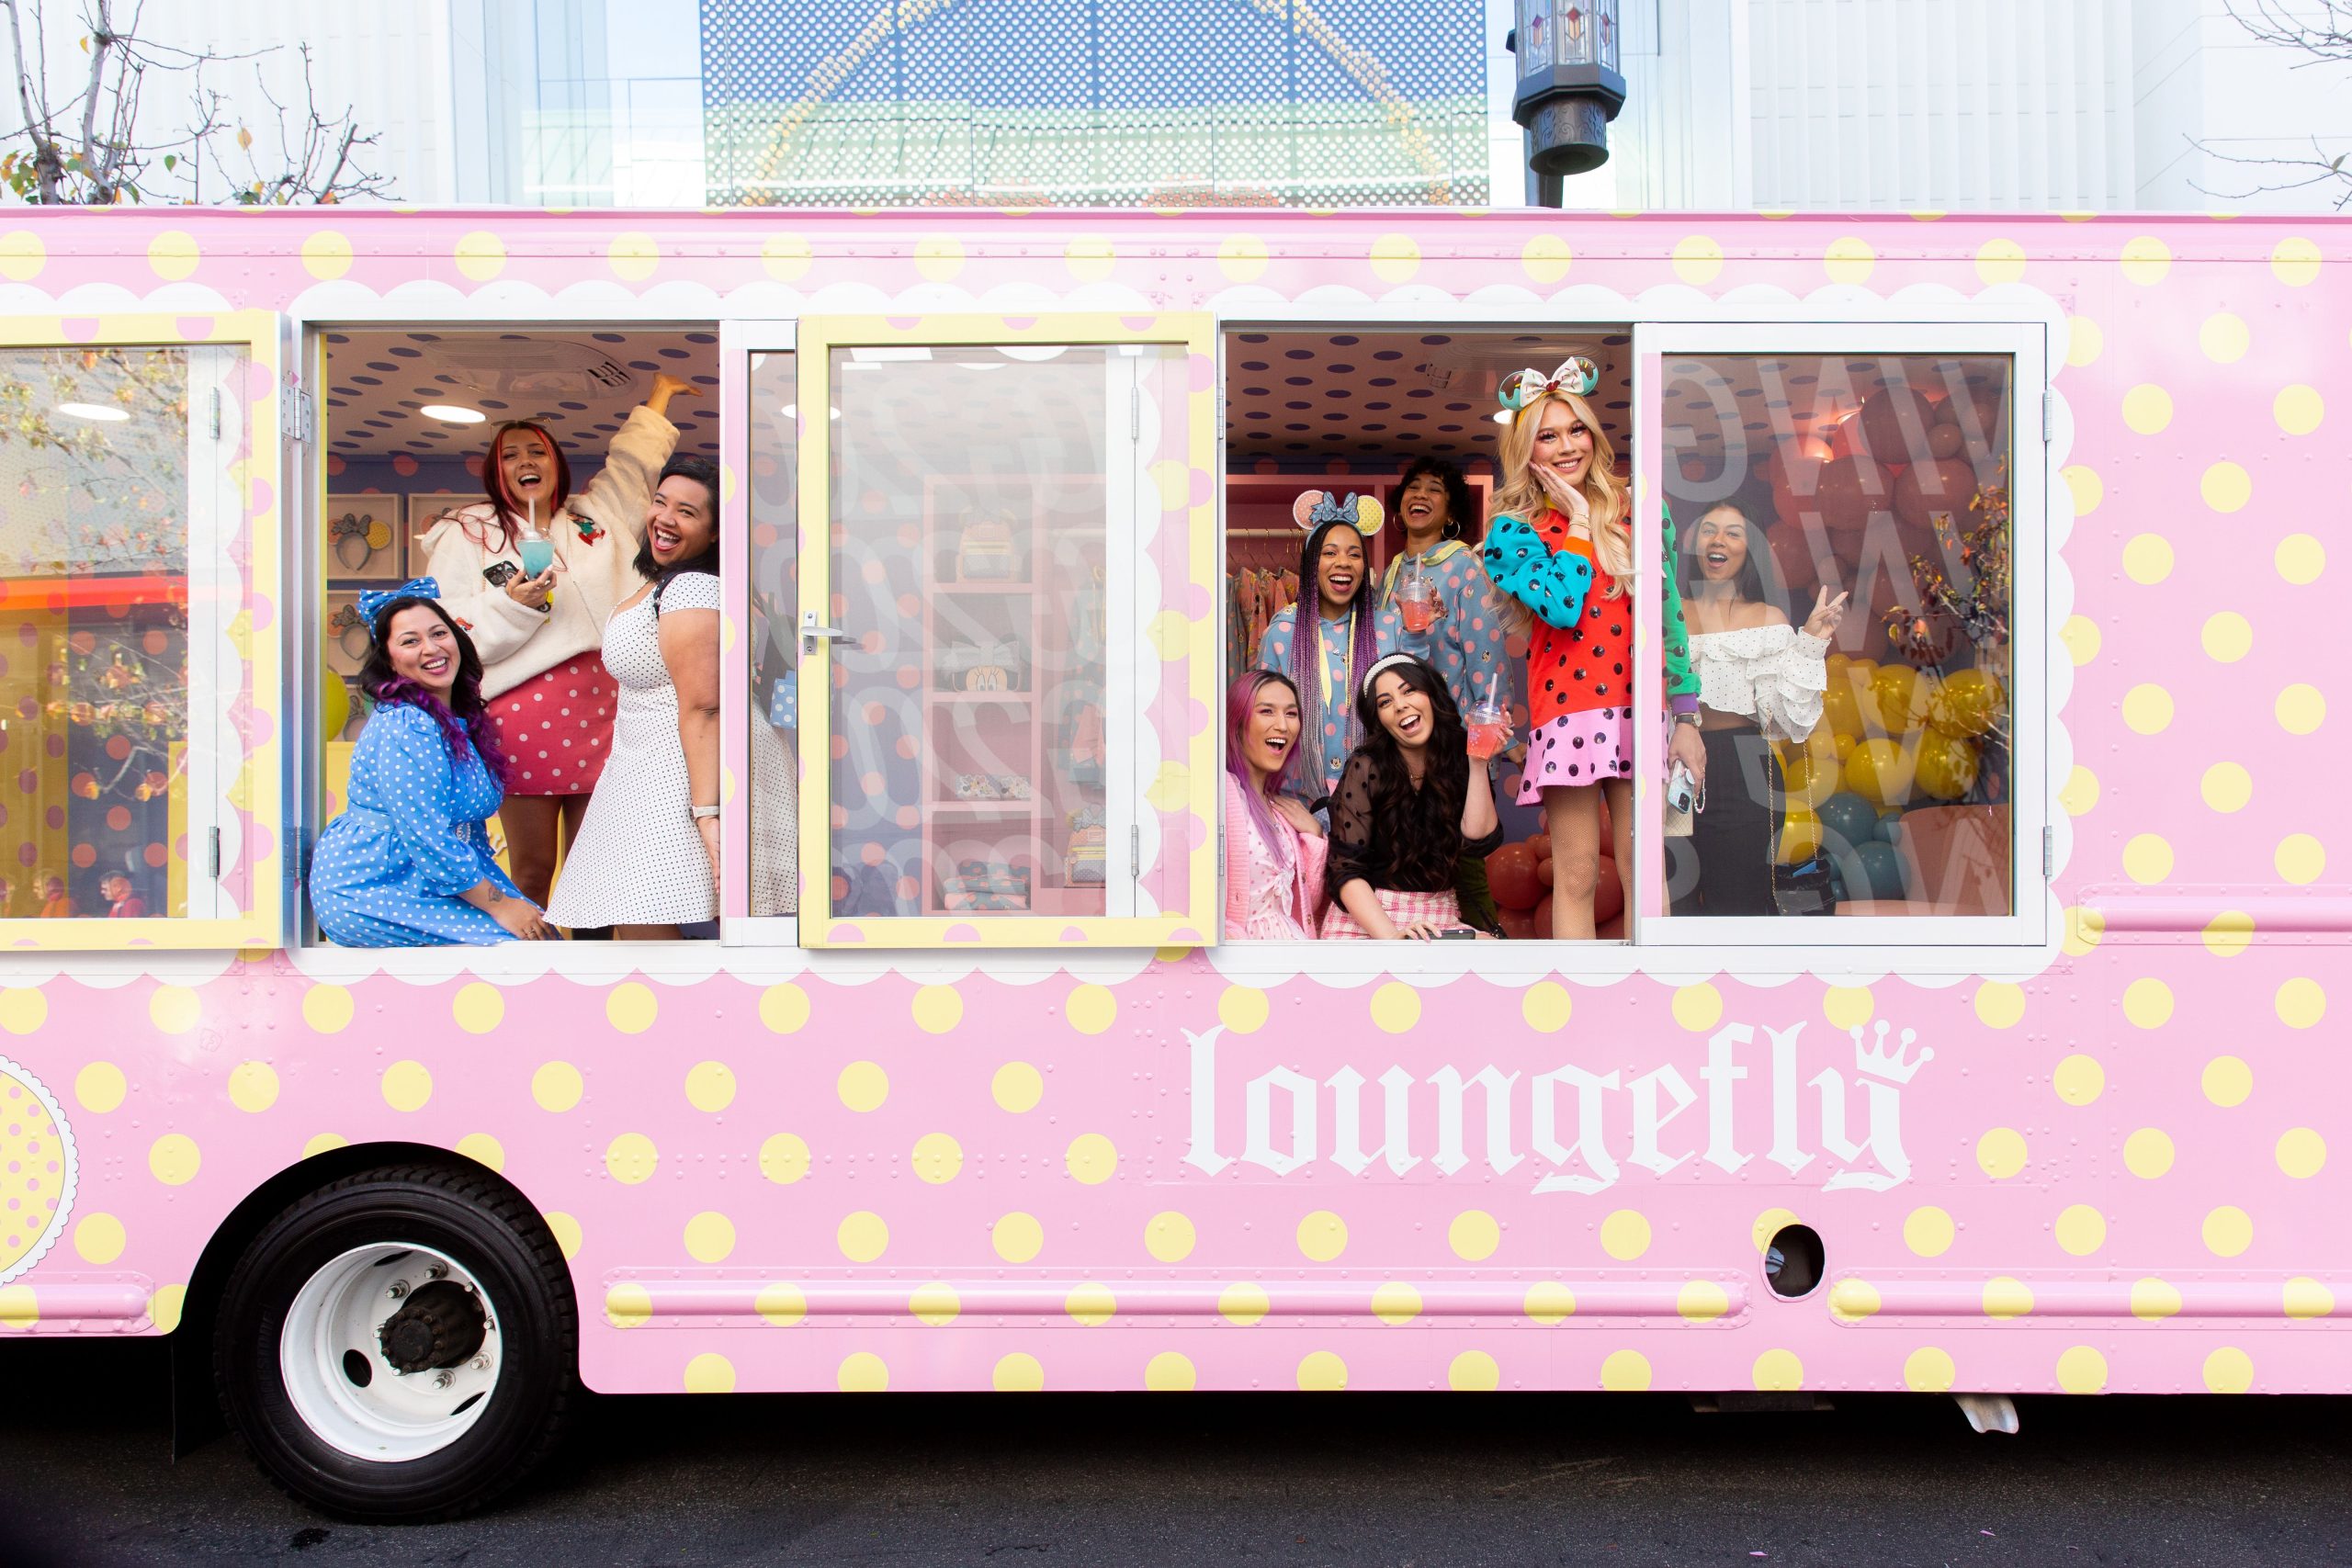 Loungefly pop-up truck